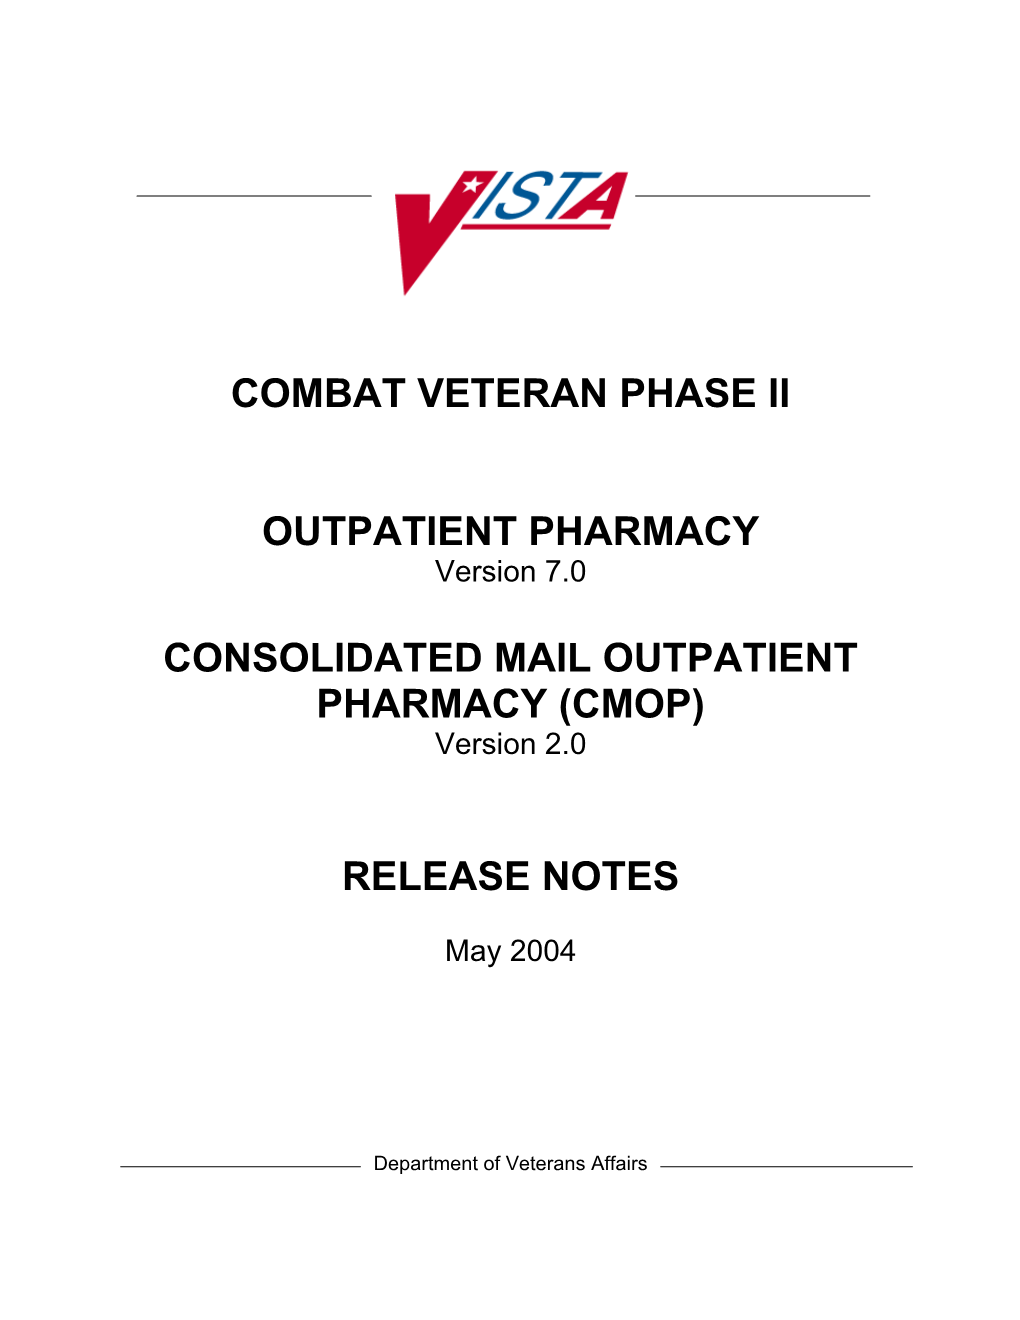 Consolidated Mail Outpatient Pharmacy (CMOP)